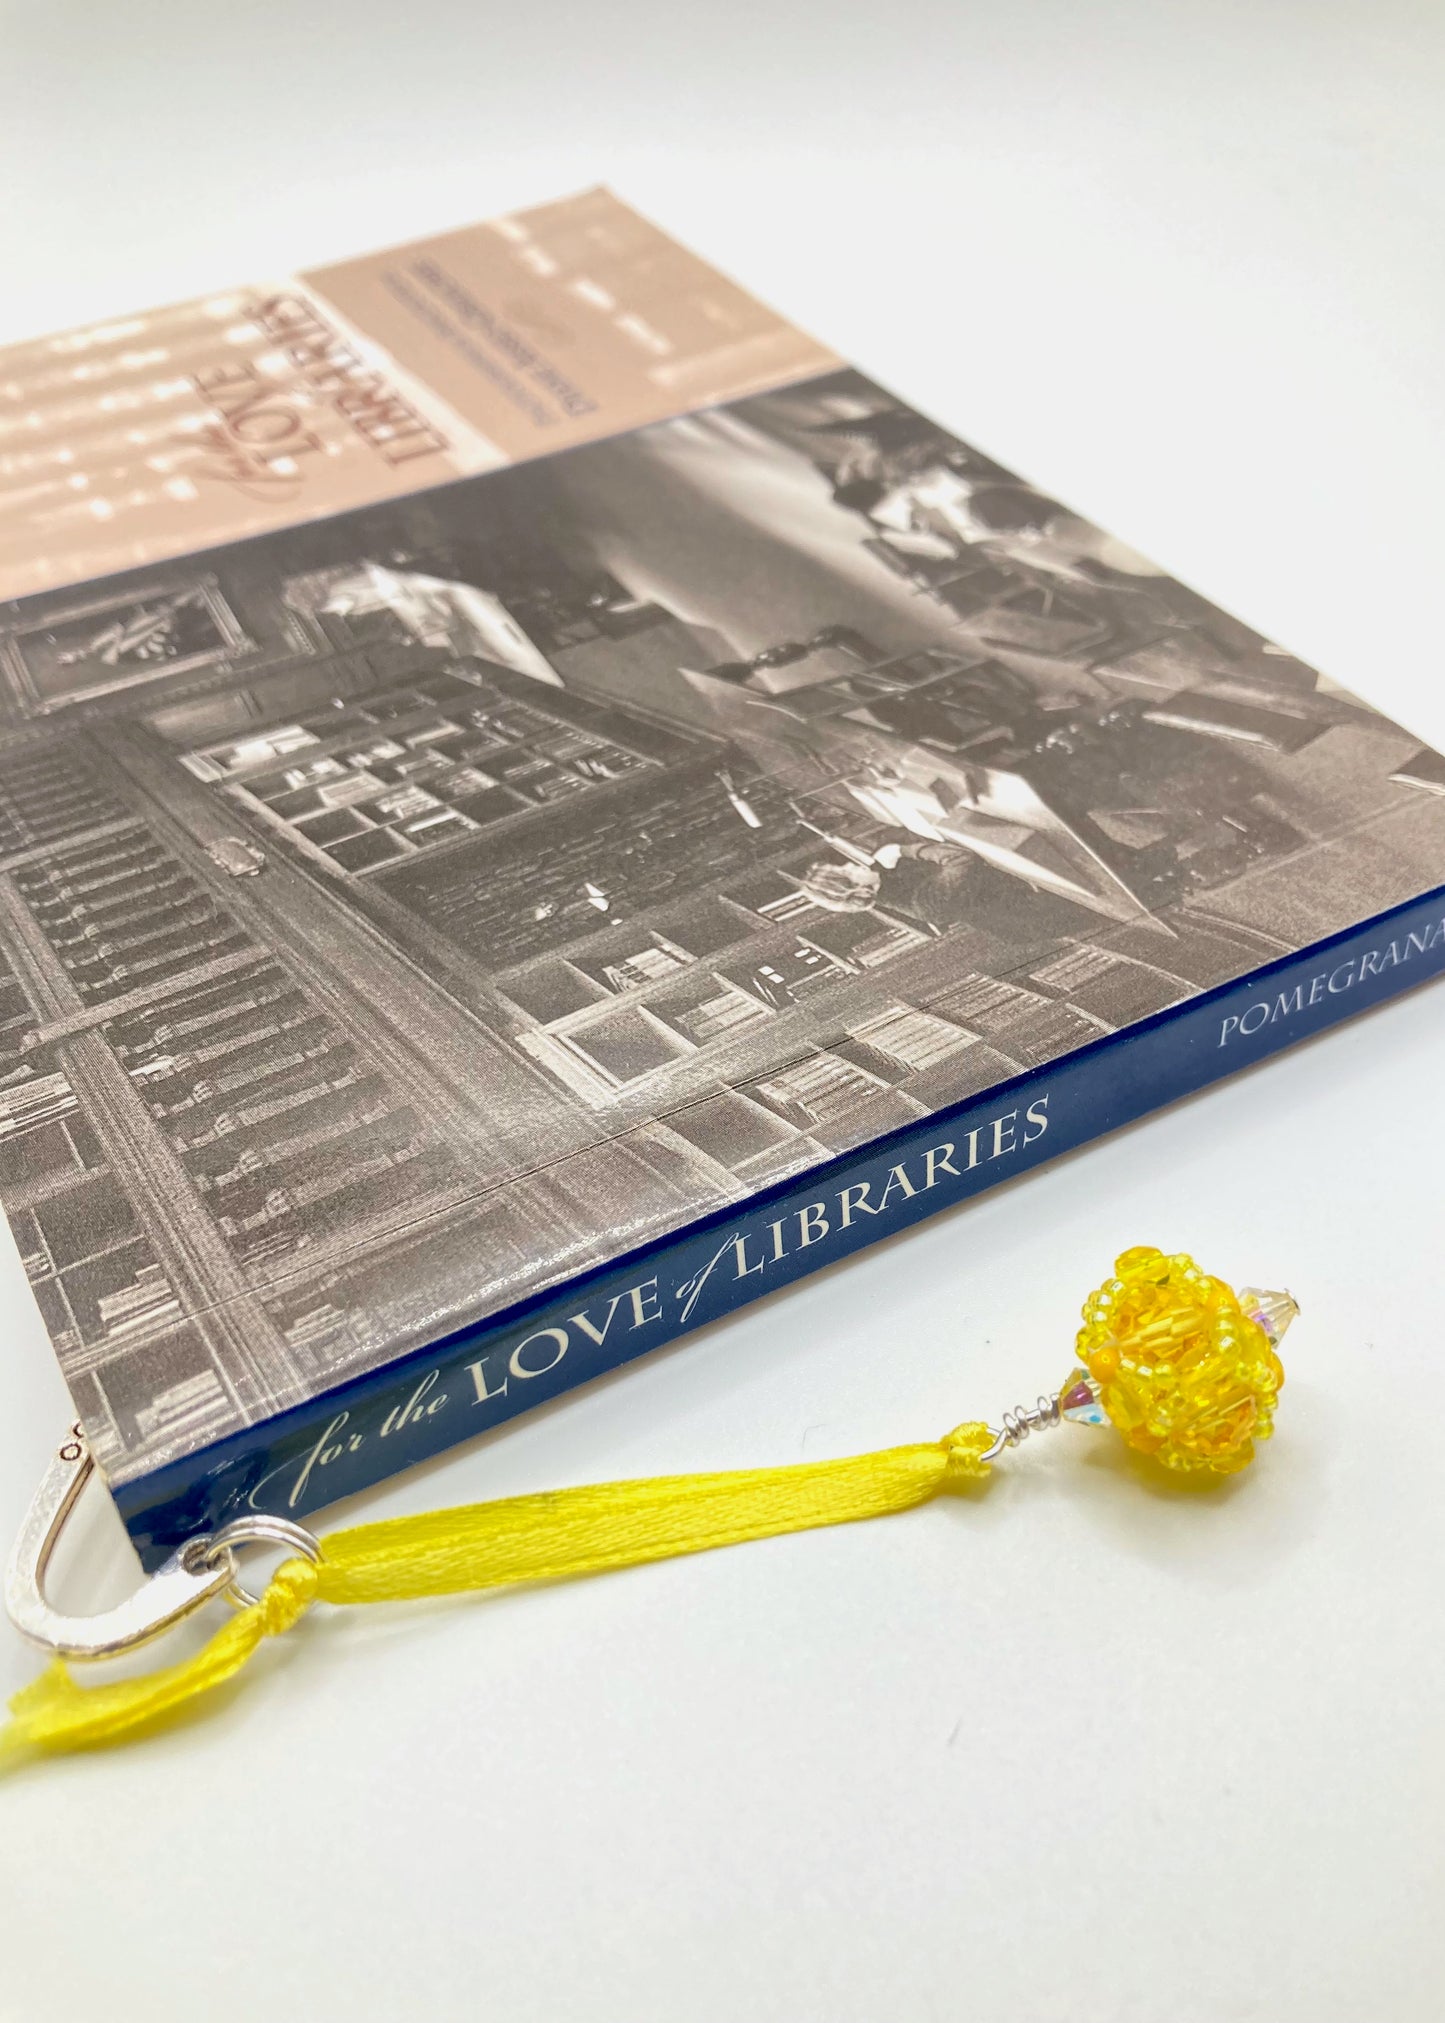 Lemon Yellow Beaded Bookmark -- Gifts for Book Lovers and Librarians